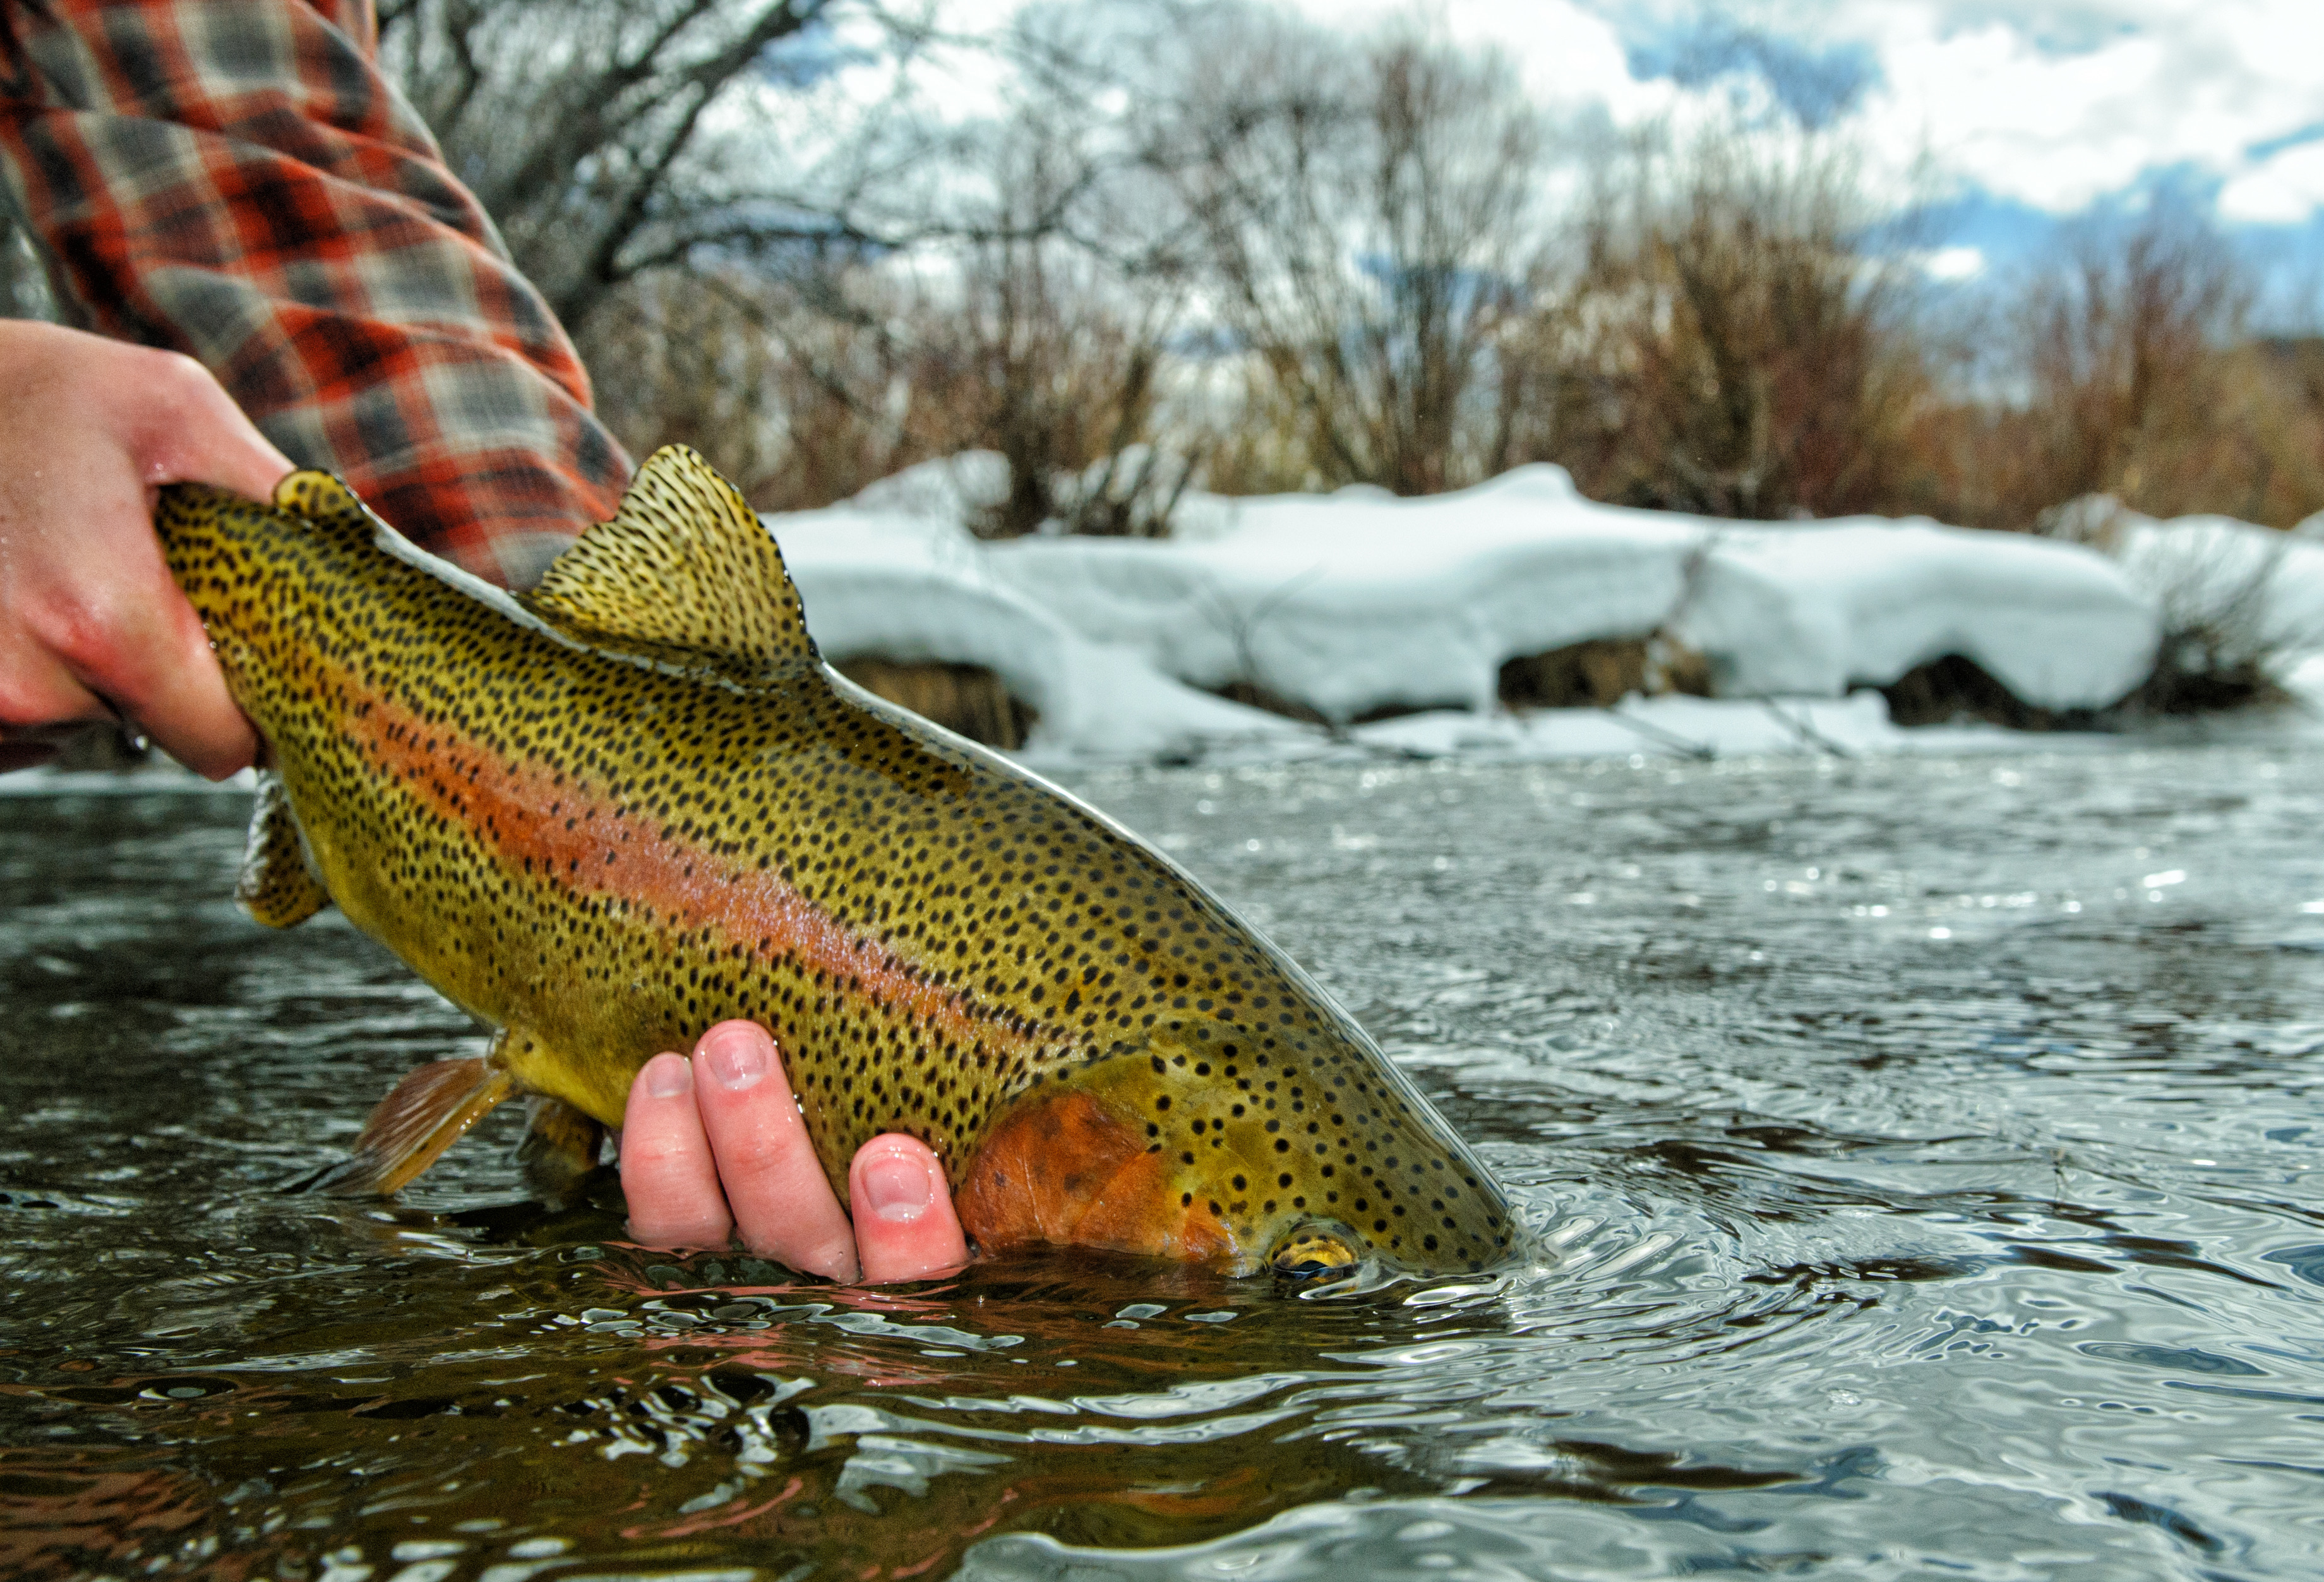 Trout Fishing in Winter: 8 Tips and Tricks - River Run Angling